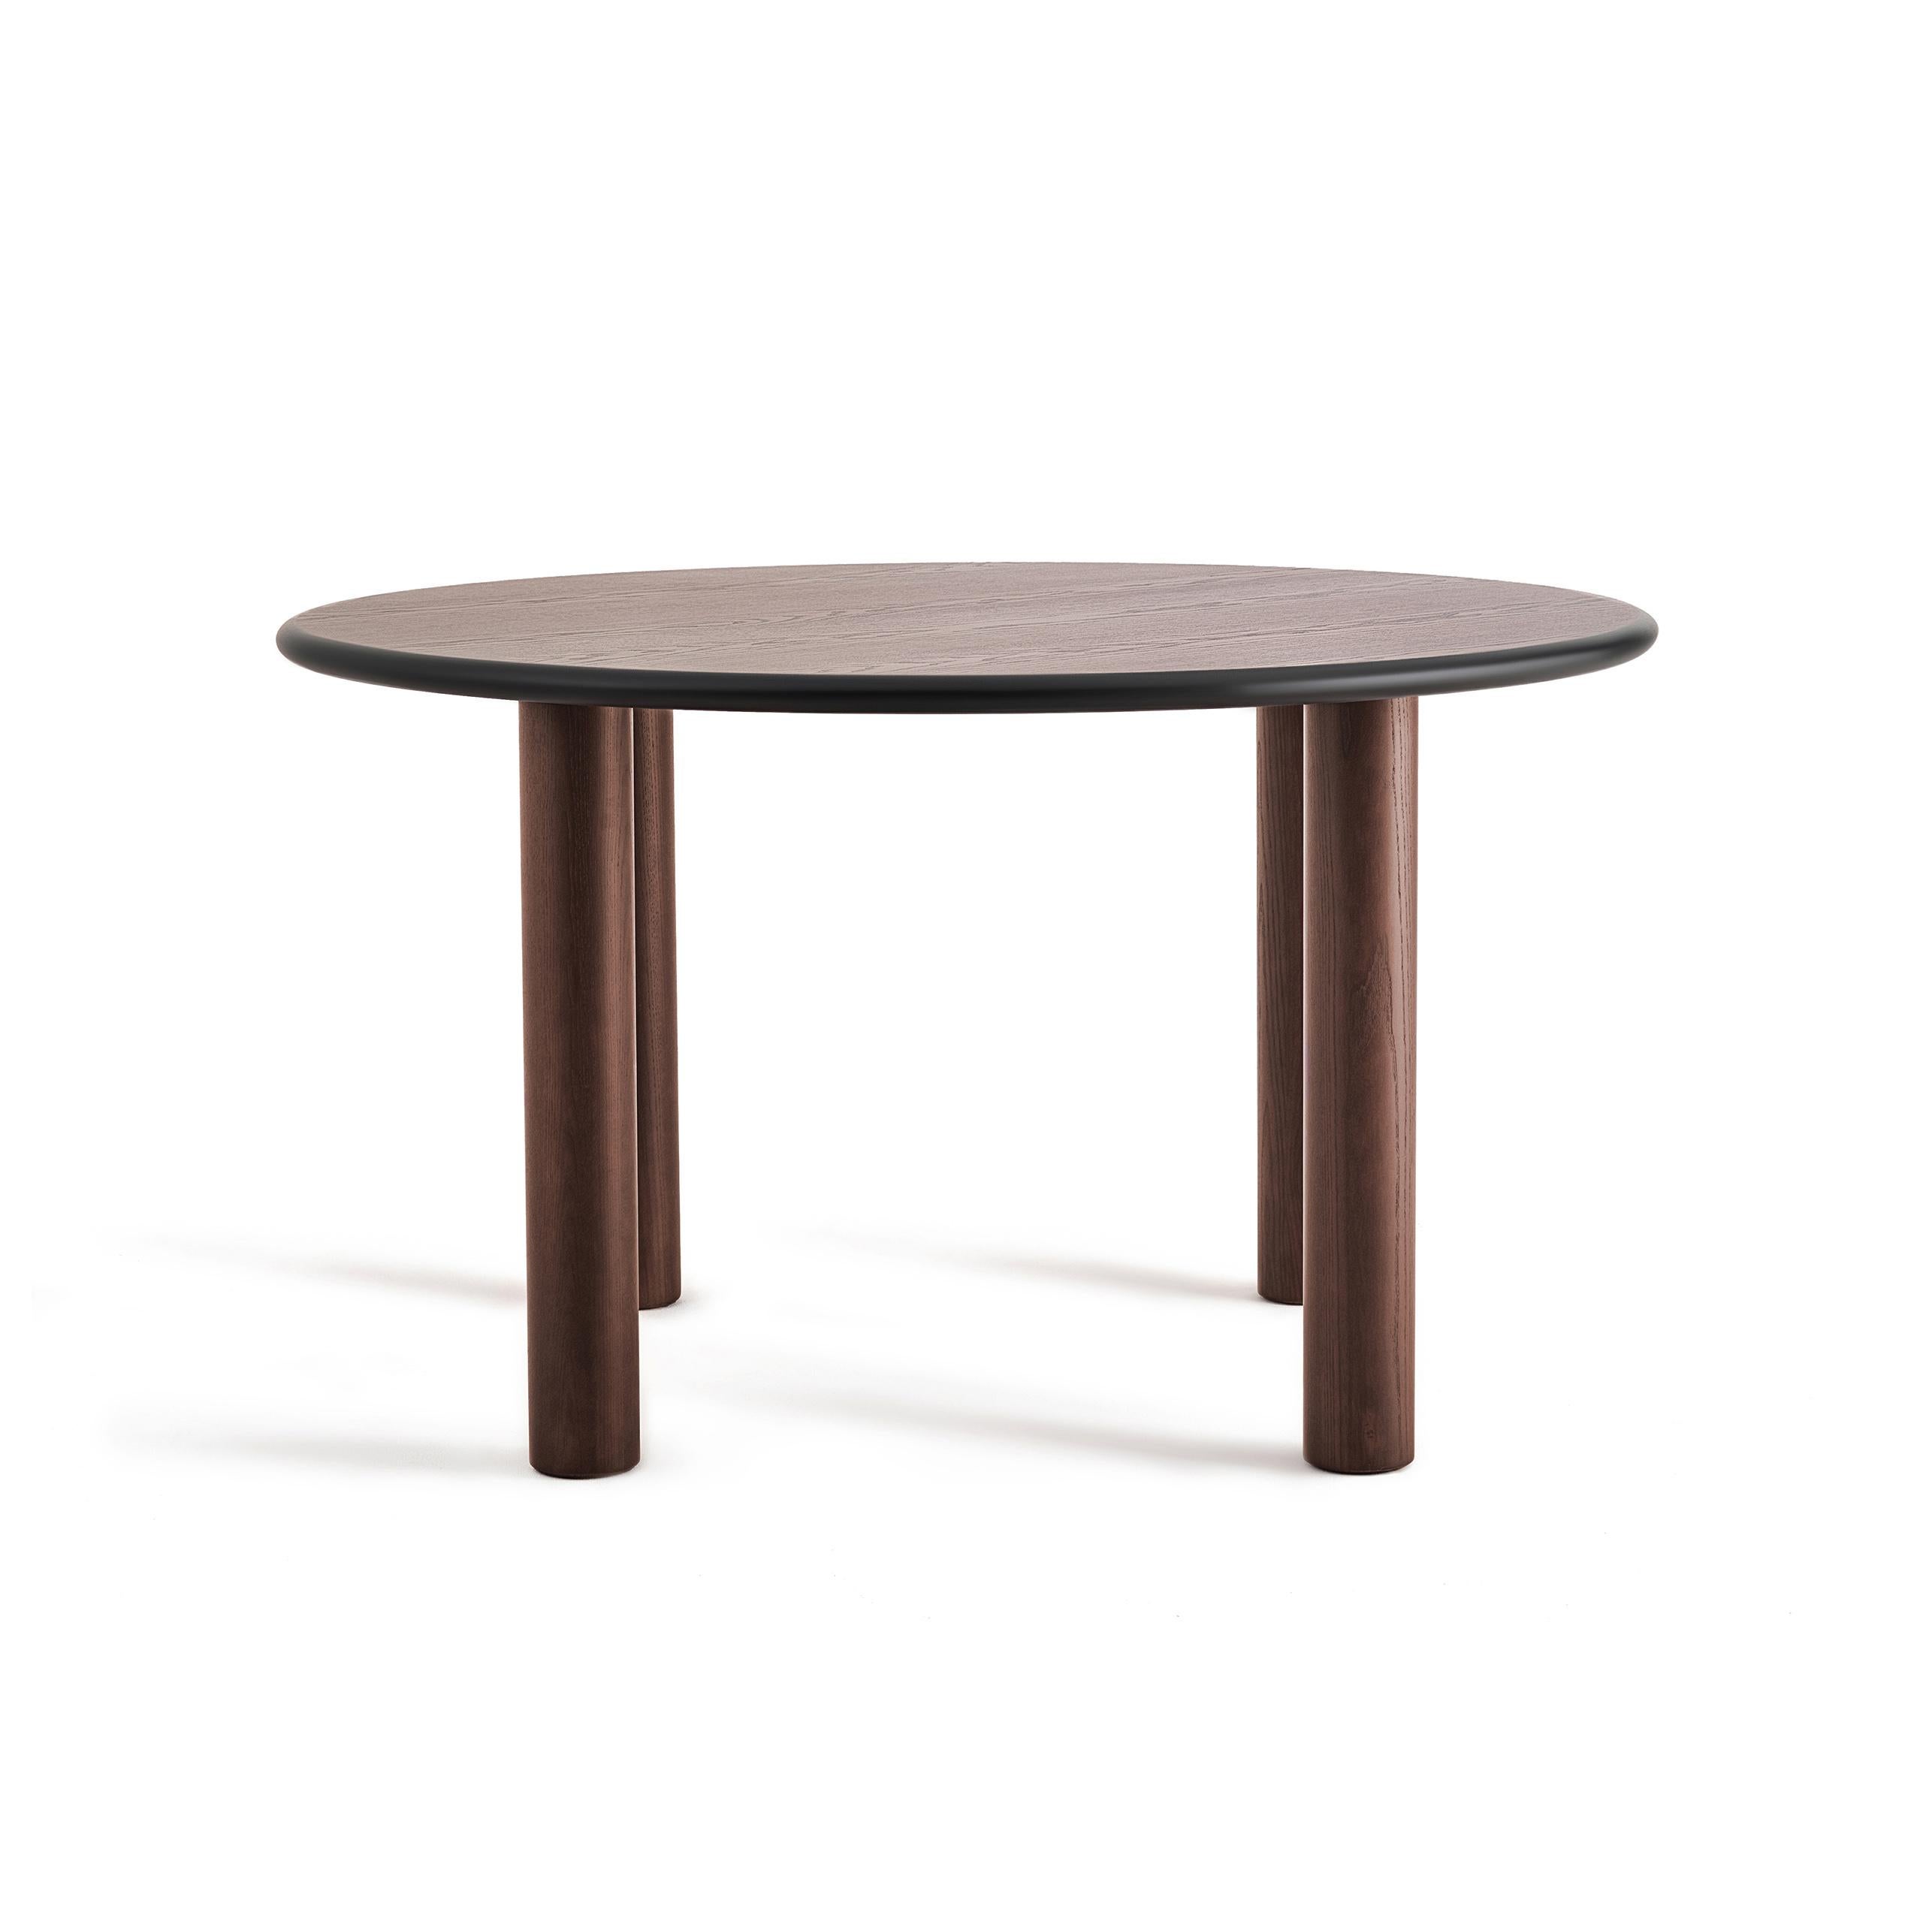 The table's design is a 